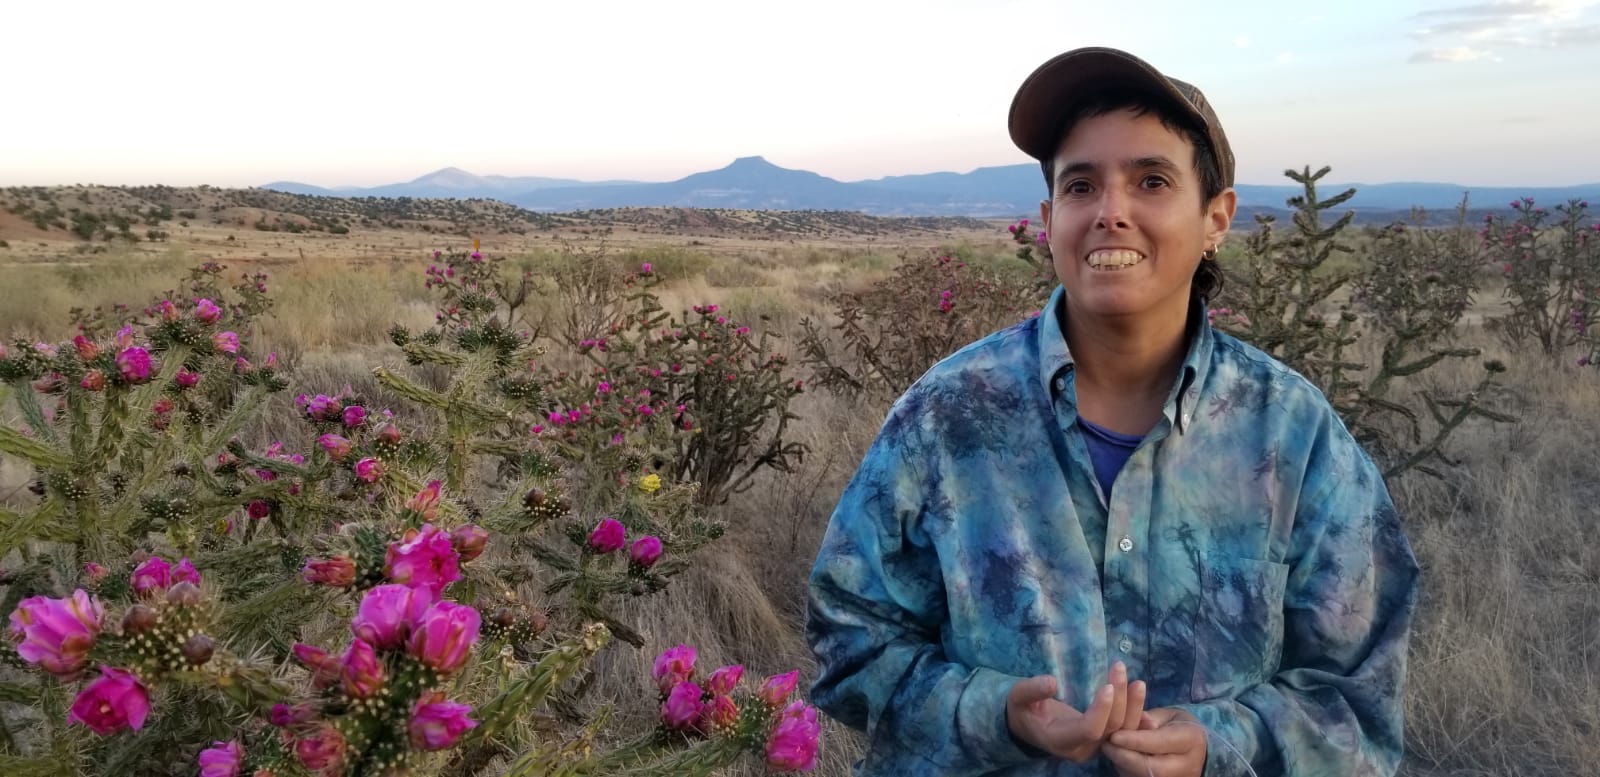 Amelia is framed to the right of the picture smiling. They are wearing a sky blue tie dye shirt and brown cap. They are pictured in Abiquiu, New Mexico, by the Chama River, surrounded by cholla cacti blooming bright pink flowers with a mountainous landscape behind.